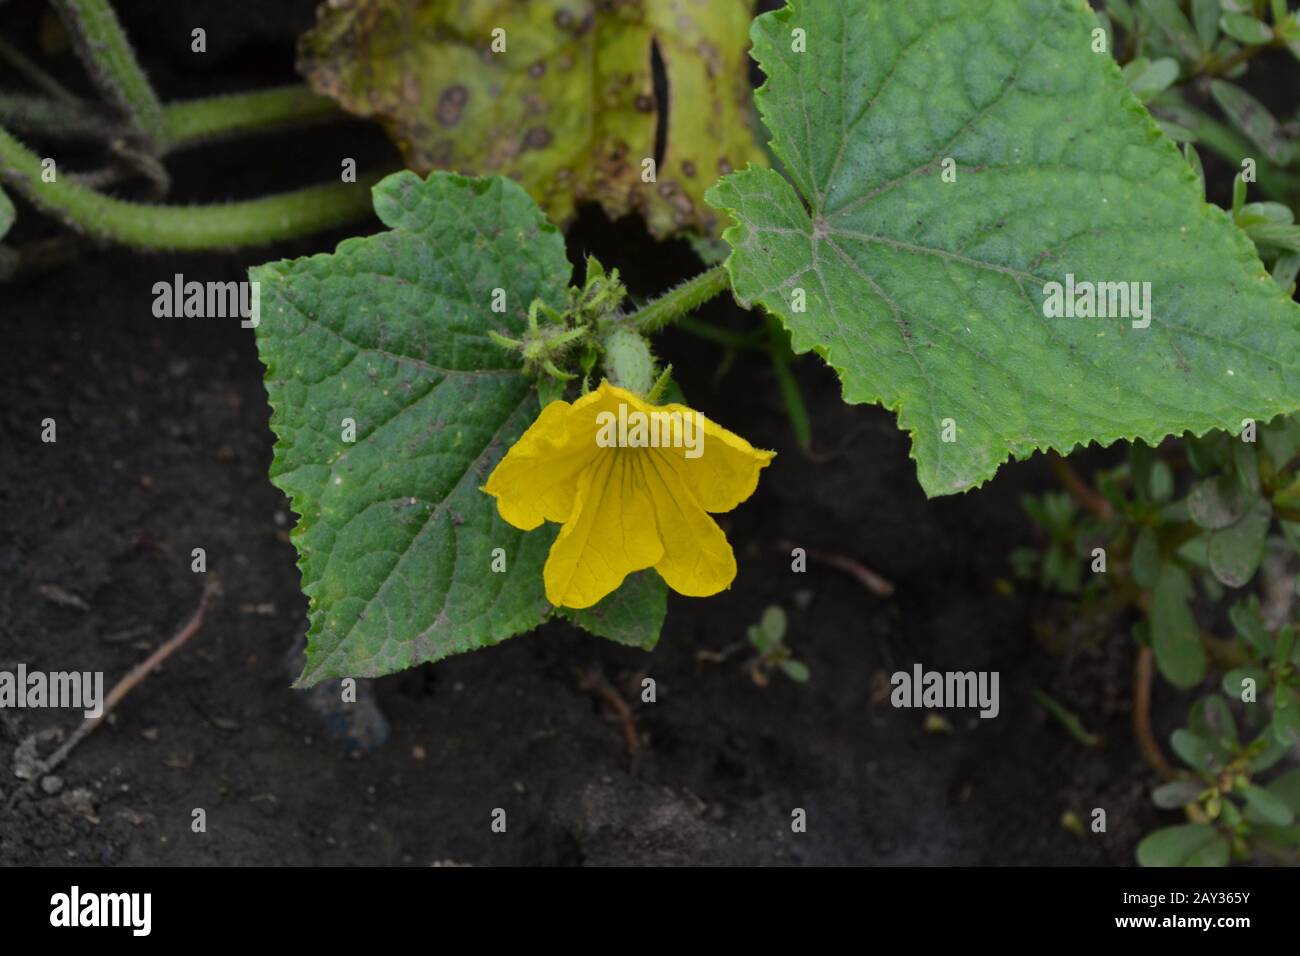 Cucumber. Cucumis sativus. Cucumber Leaves. Flowers cucumber. Cucumber growing in the garden. Garden. Field. Cultivation of vegetables. Horizontal pho Stock Photo